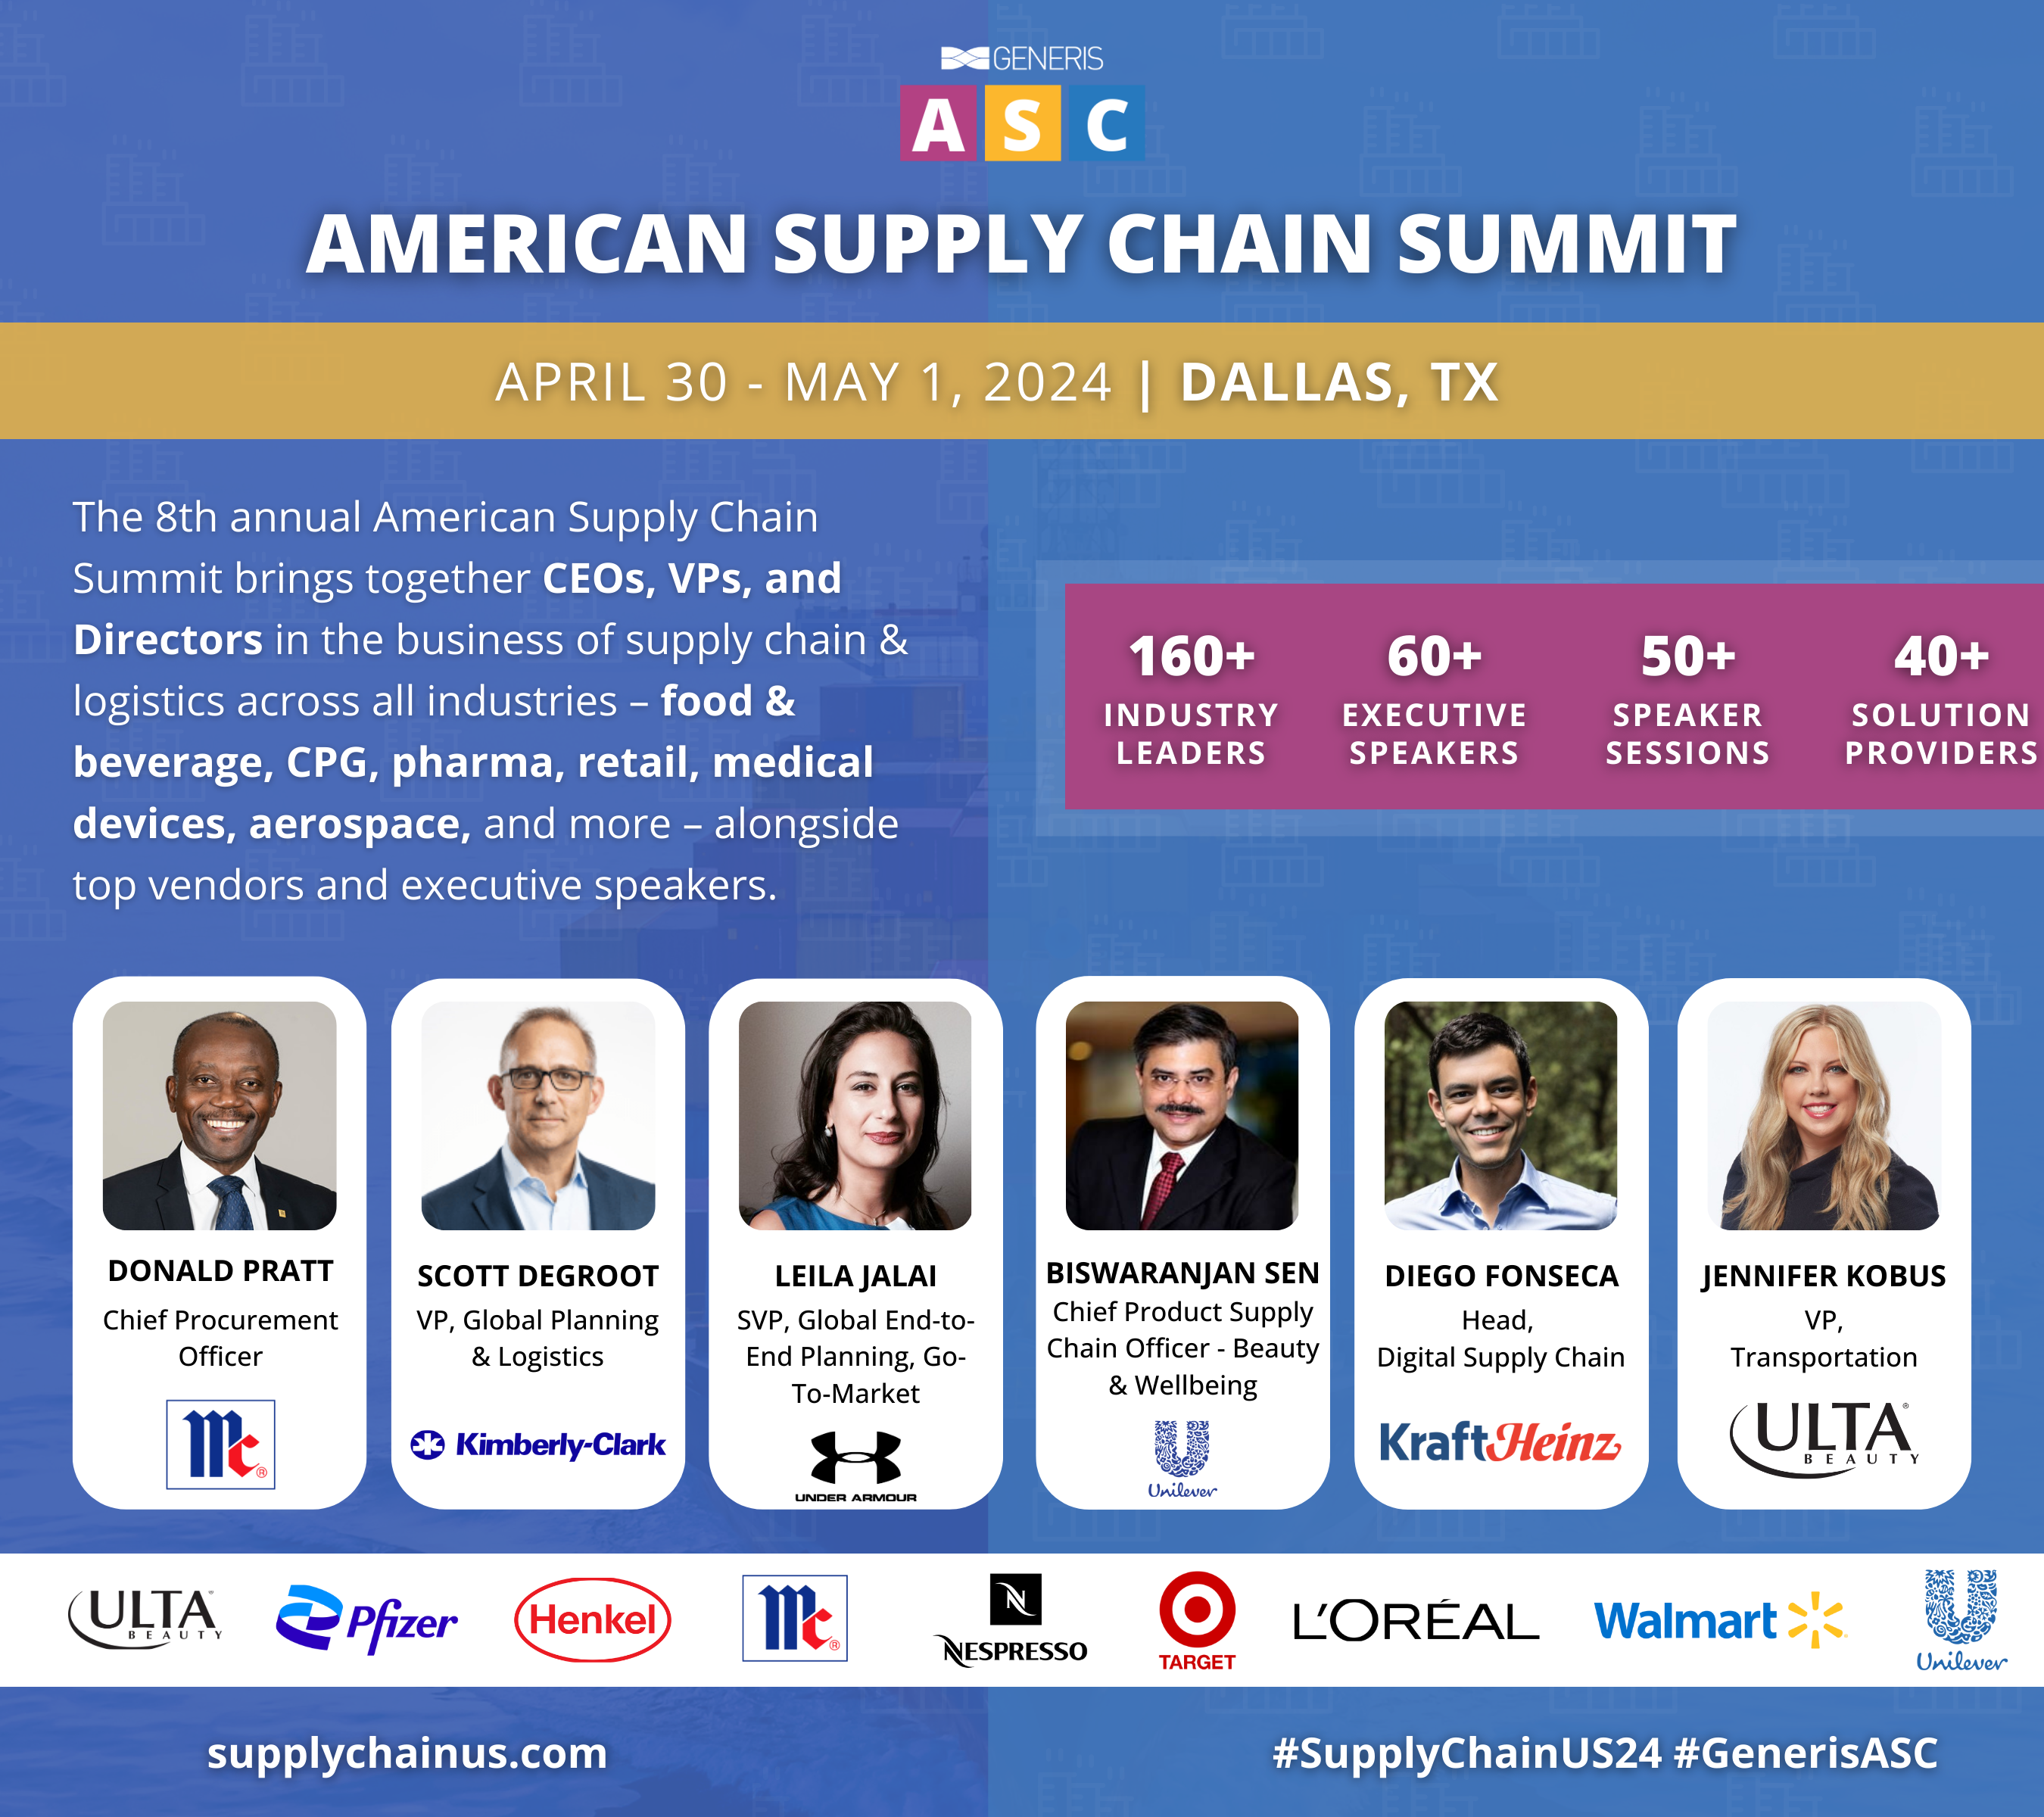 April 30 - May 1, 2024: AMERICAN SUPPLY CHAIN SUMMIT